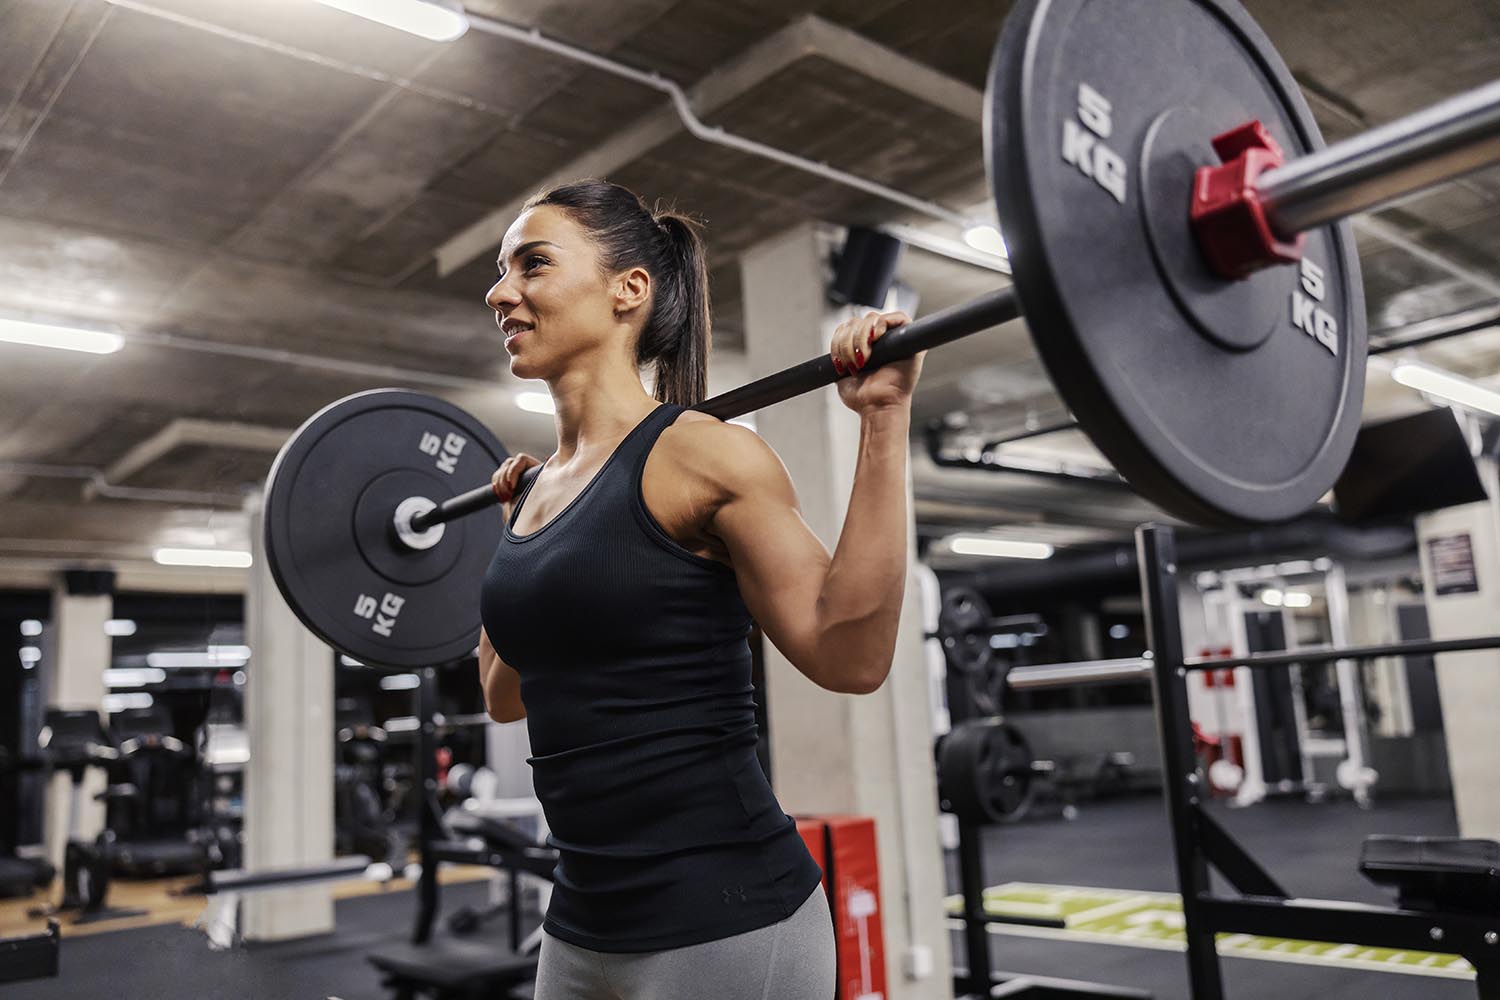 How to Avoid Common Injuries in the Gym